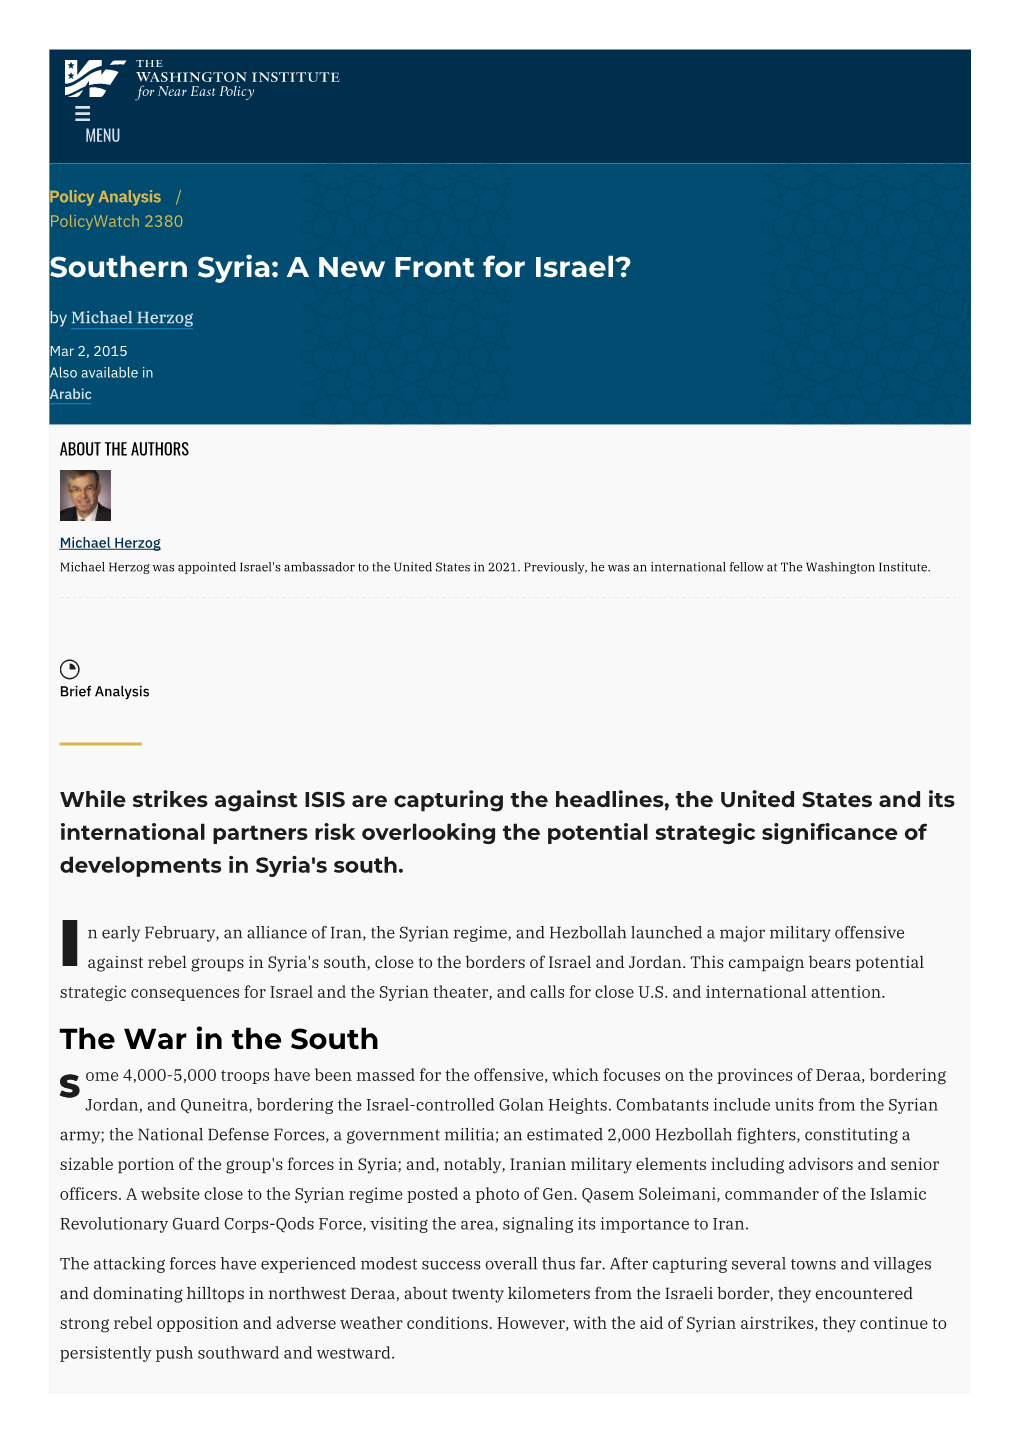 Southern Syria: a New Front for Israel? | the Washington Institute